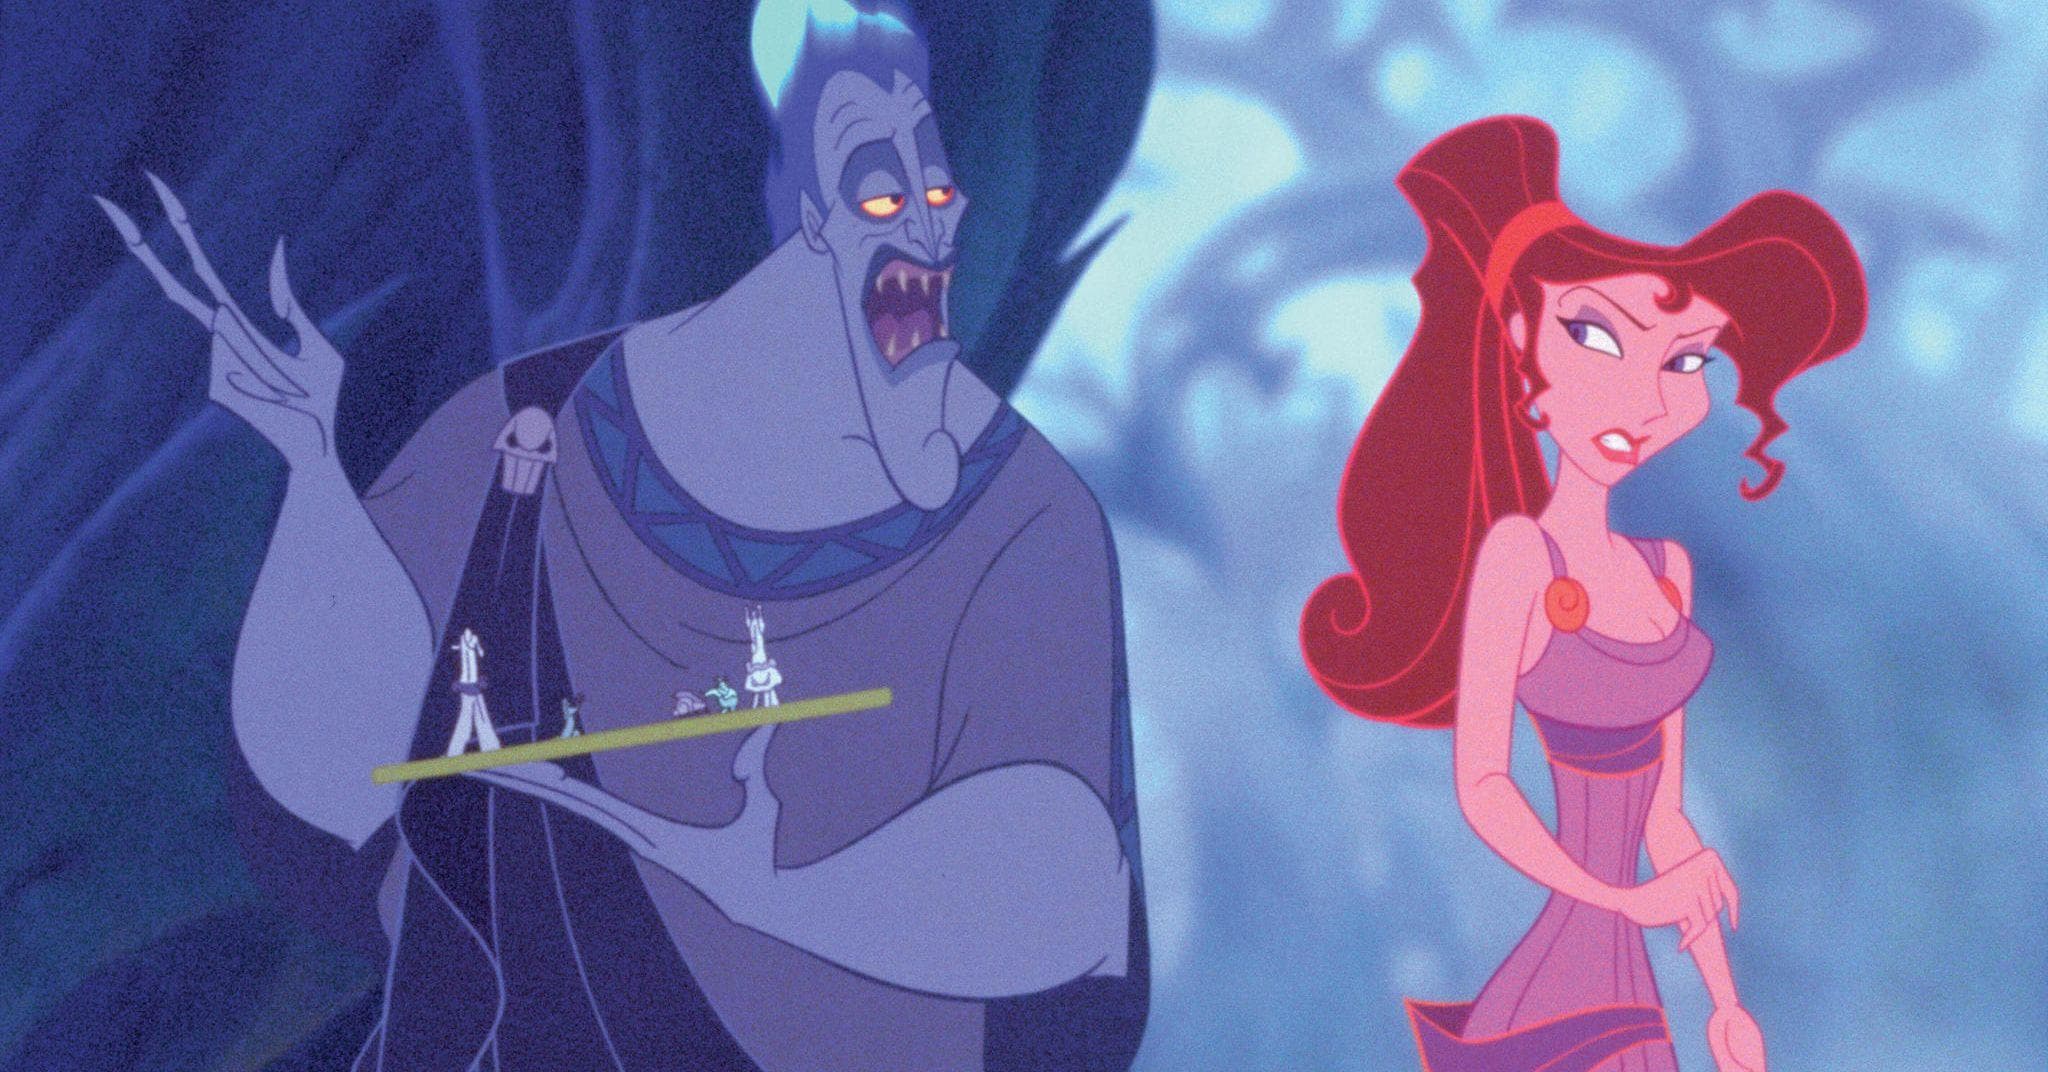 Clever Details From Hercules That Prove It's Disney's Most Underrated Movie